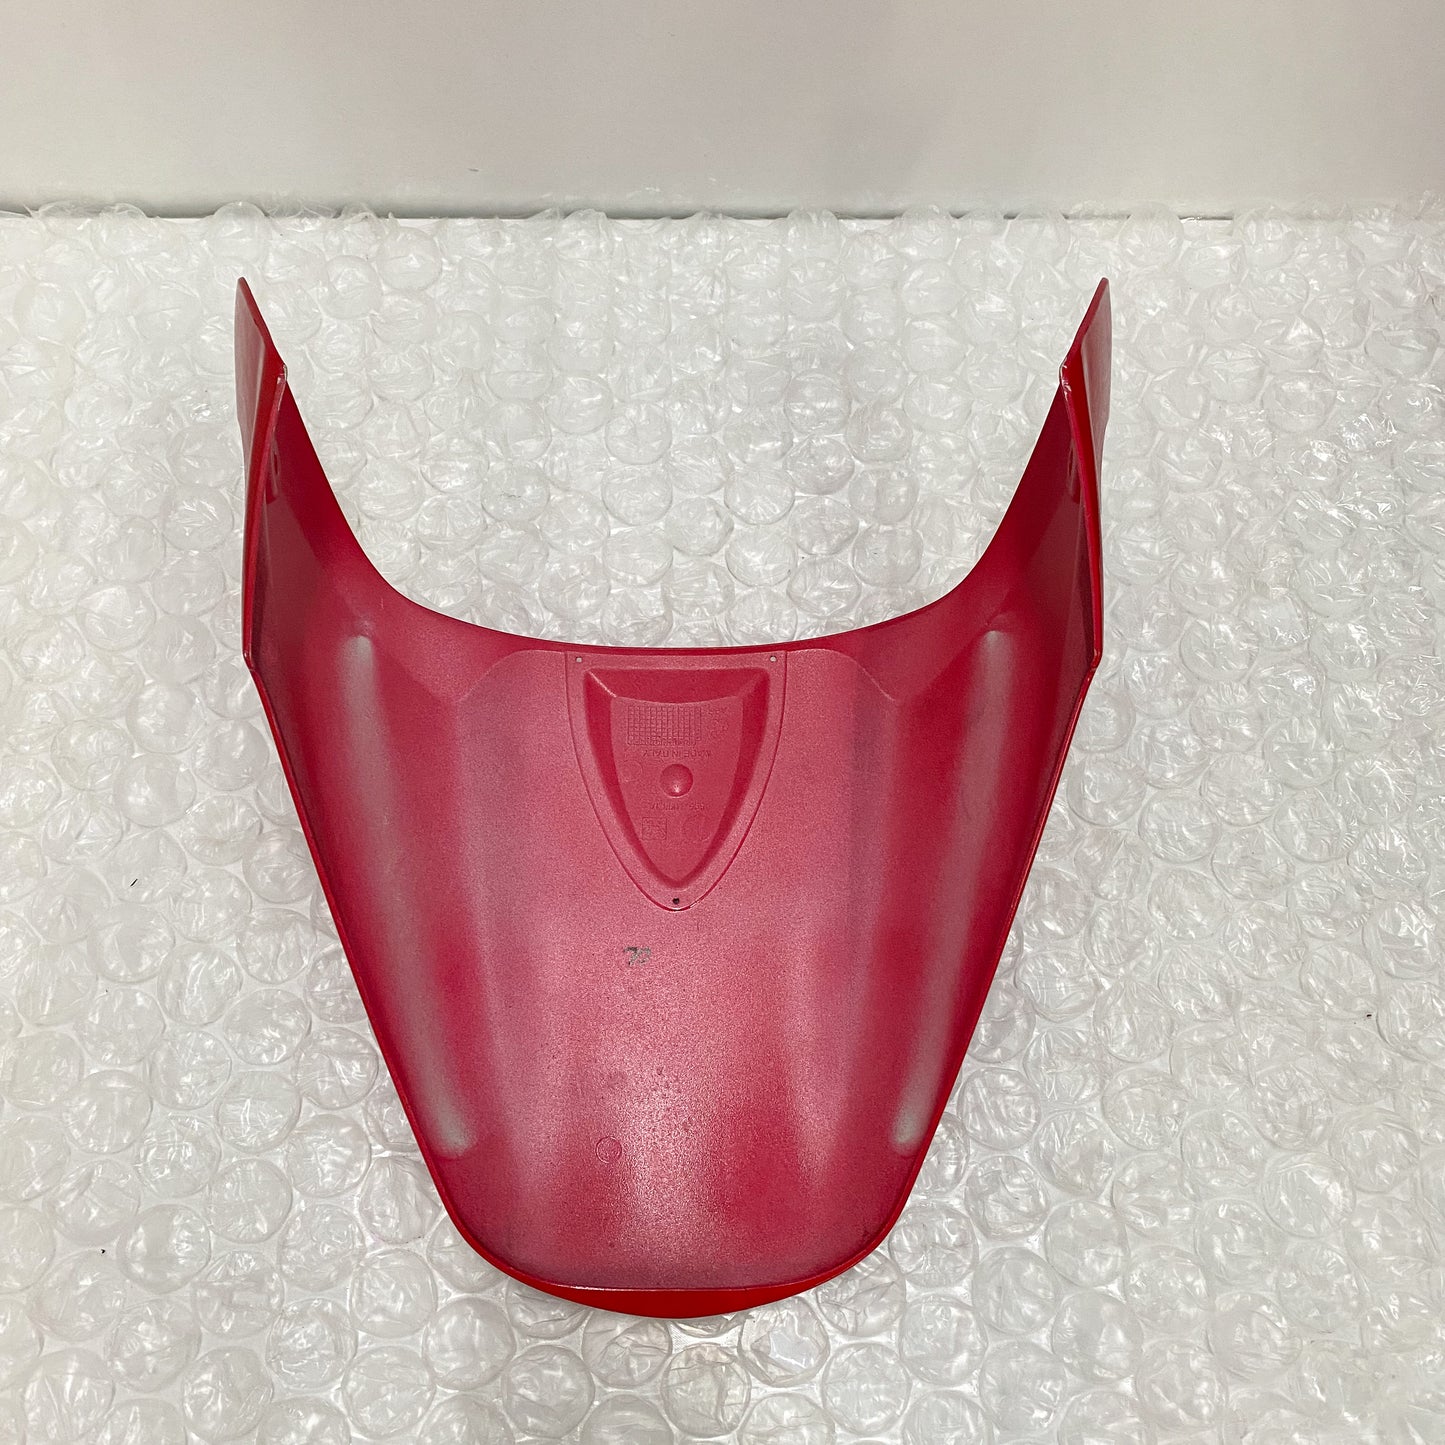 Ducati Monster 696/796/1100 Red Seat Cowl 59510981AA USED